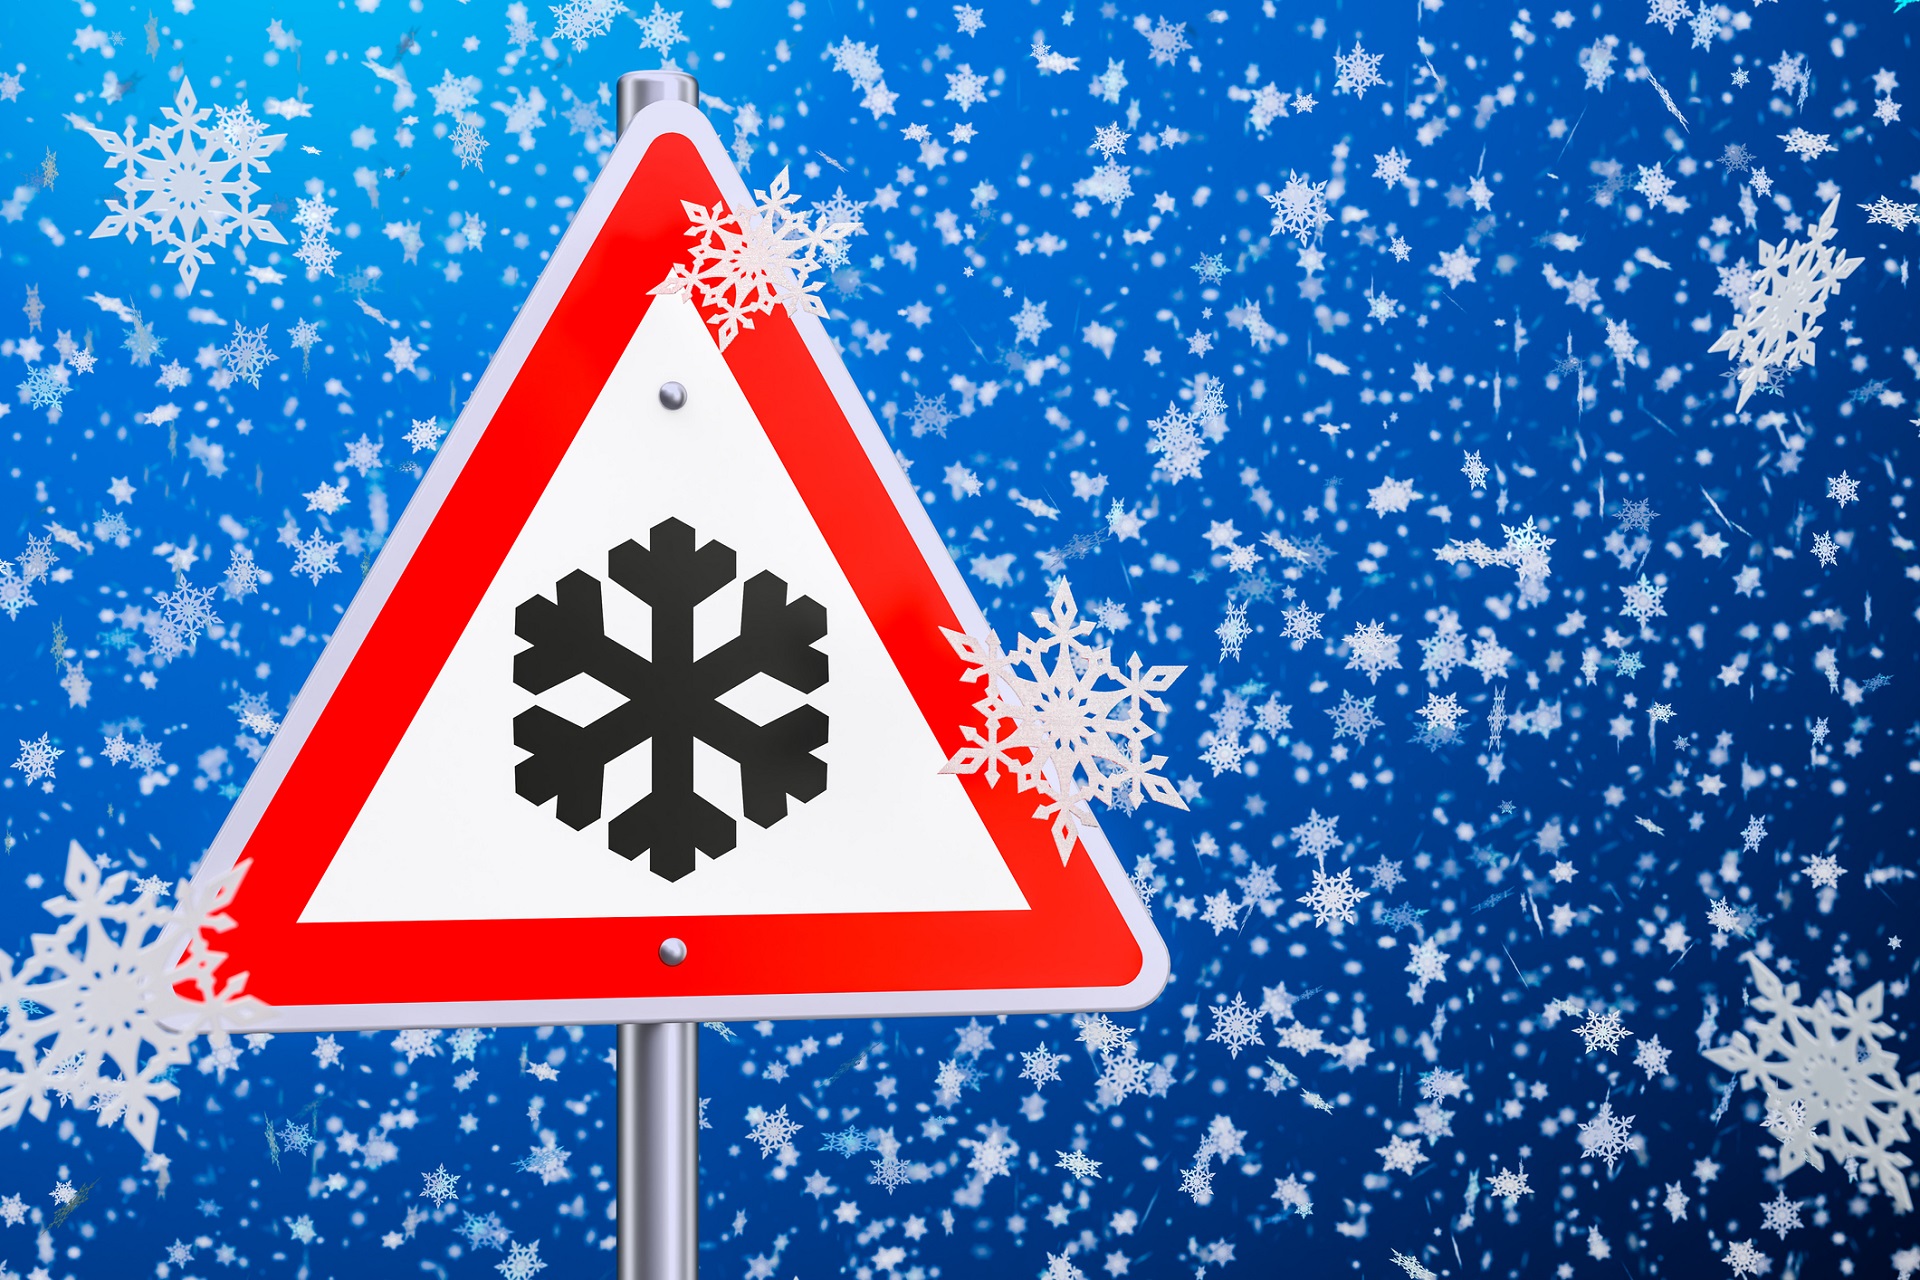 a caution sign with a snowflake